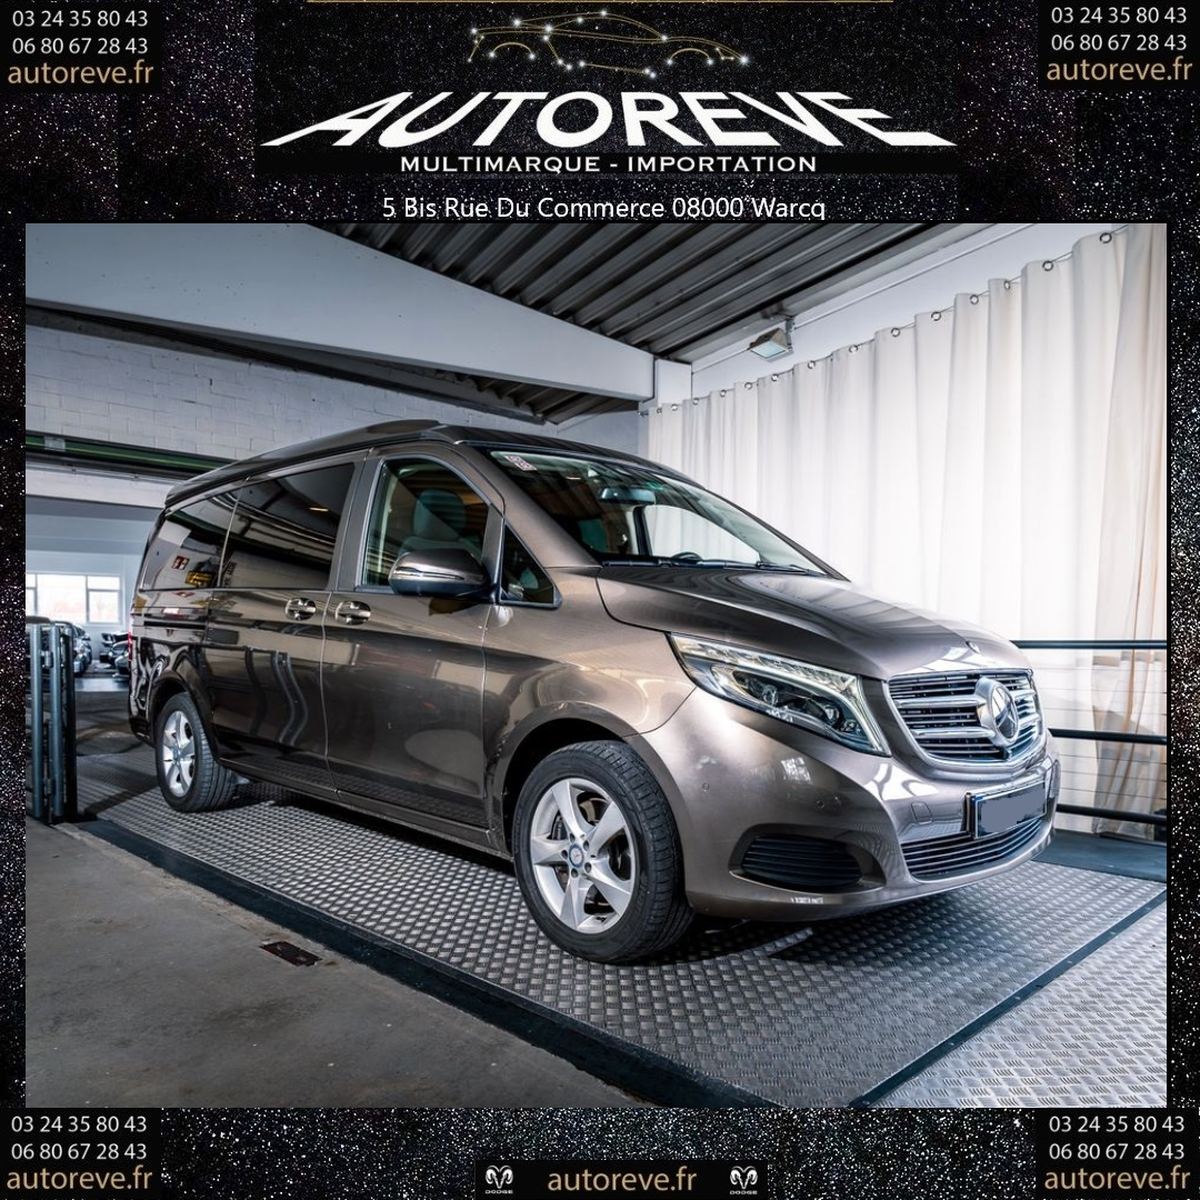 Mercedes-Benz Marco Polo v250 4x4 - Annonce